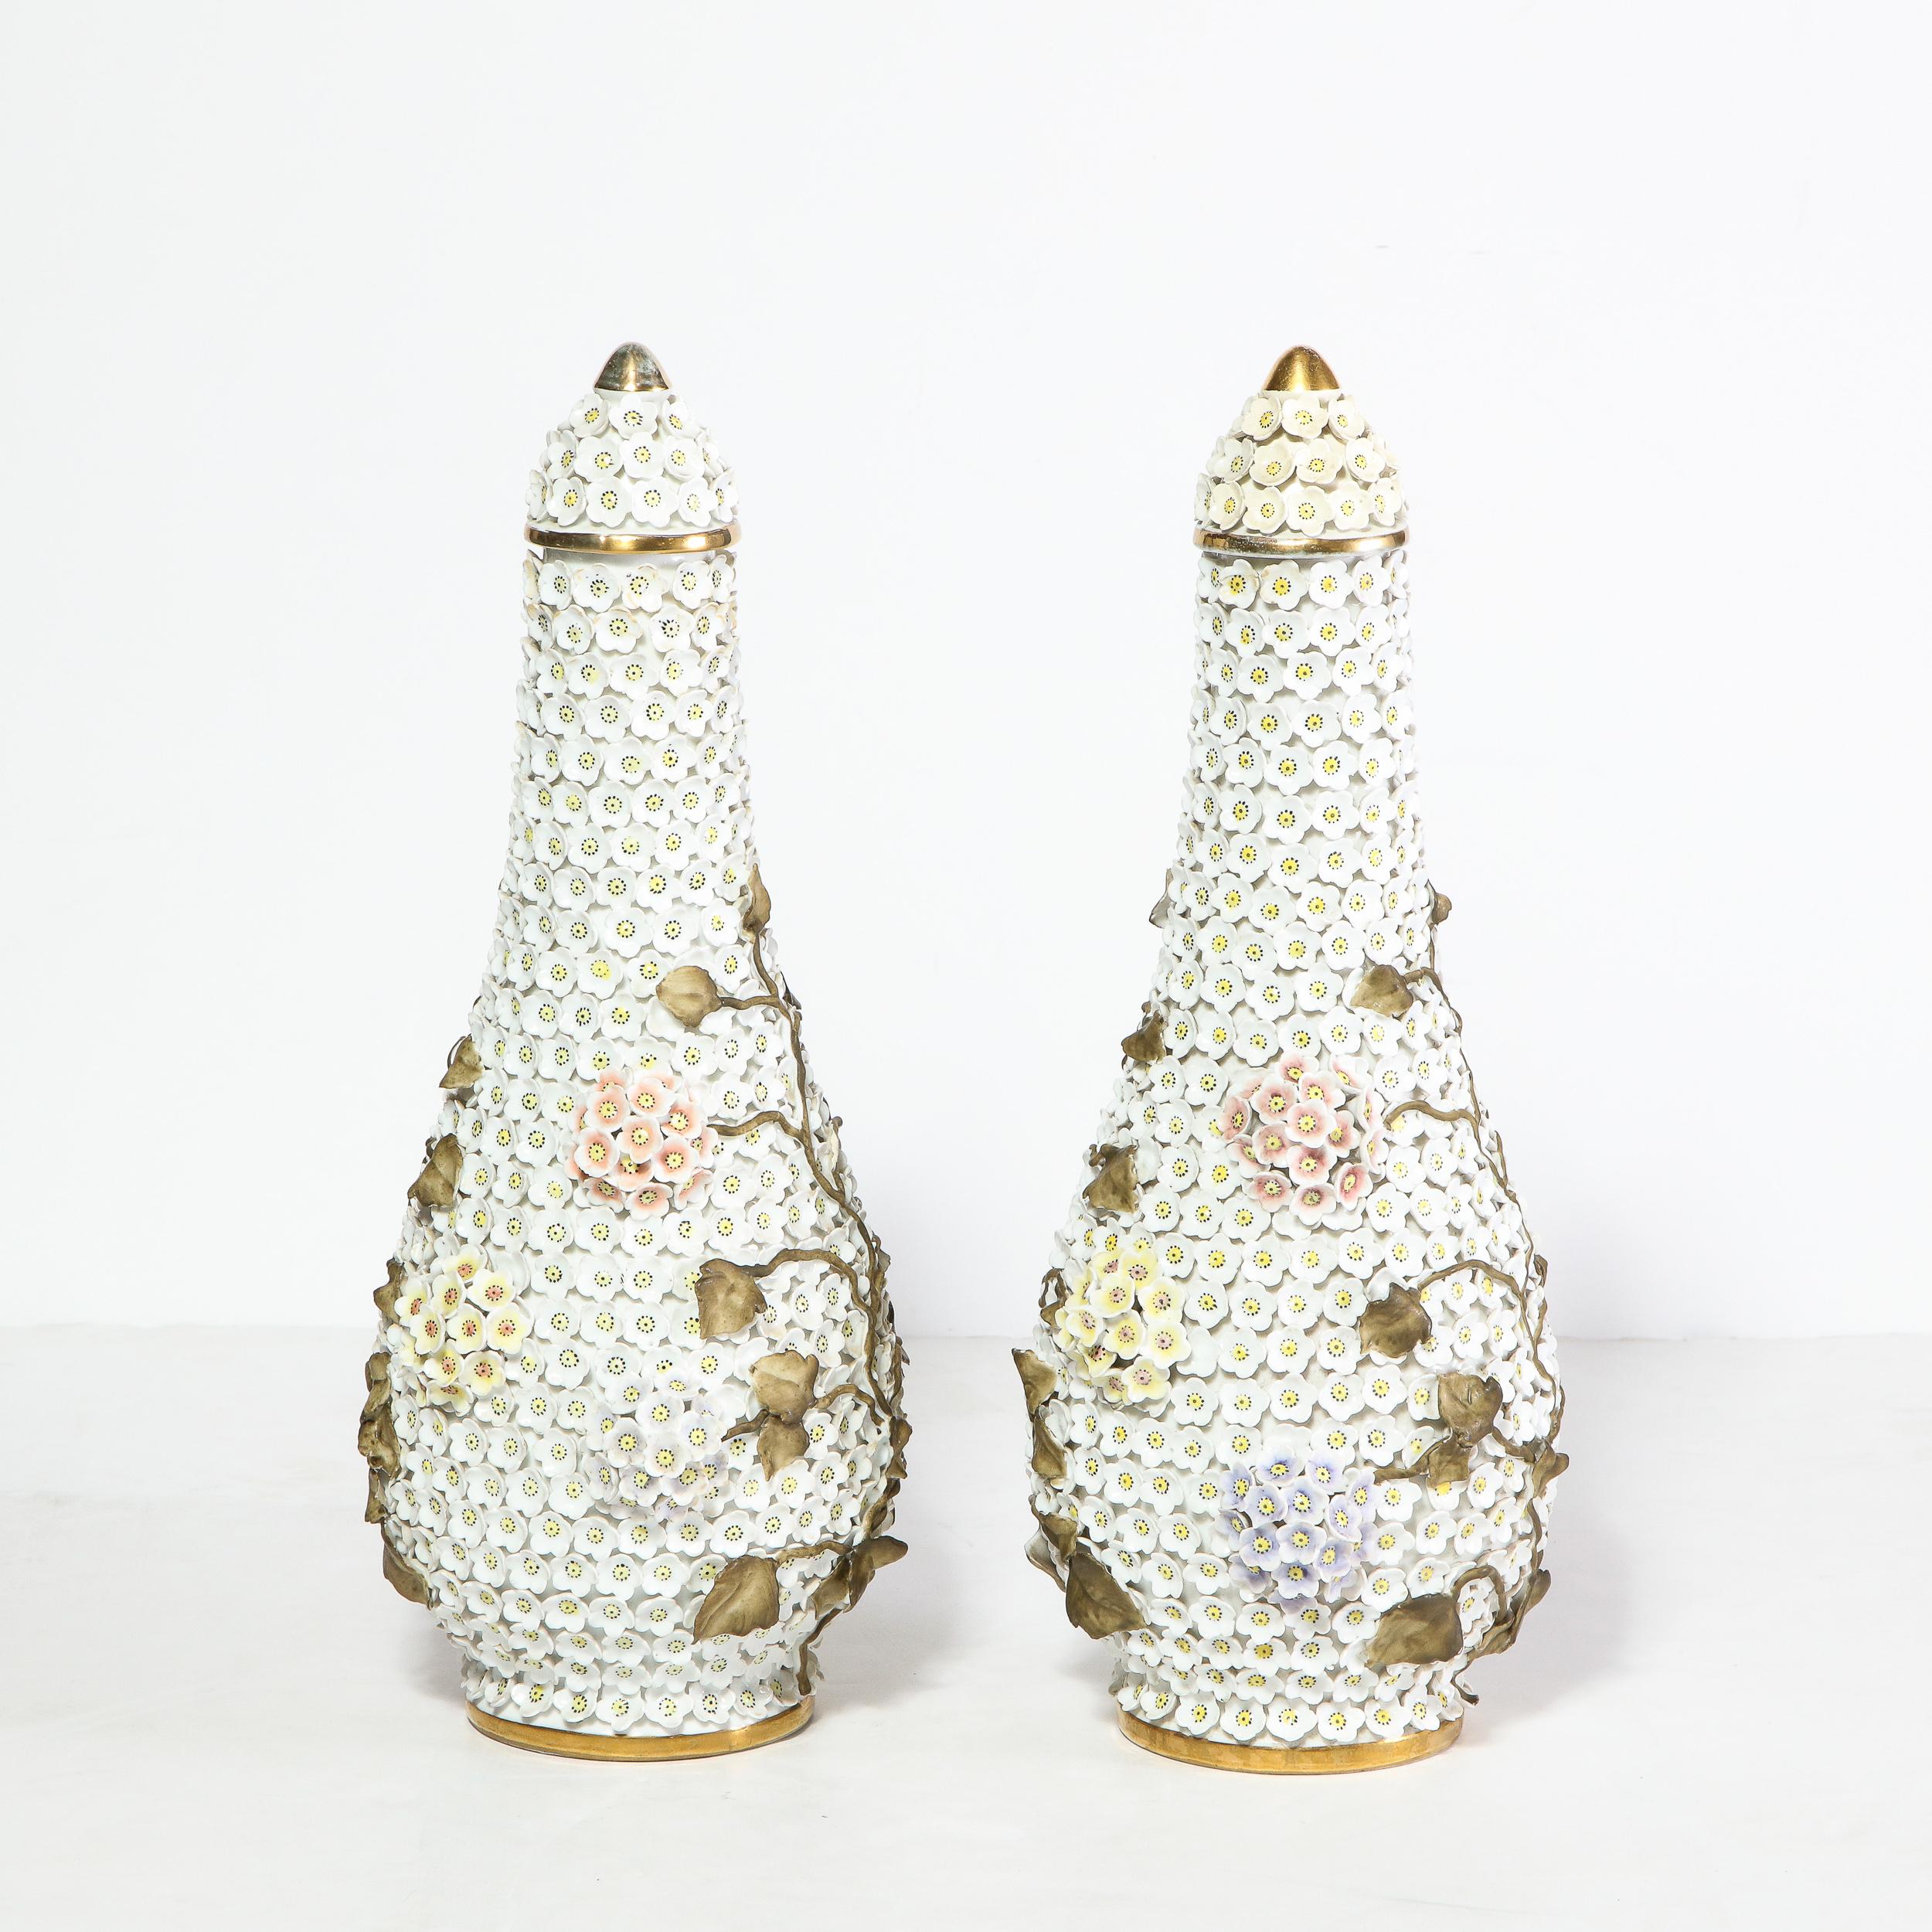 Hand-Painted Pair of Handpainted Lidded Snowballen Vases with Gilt accents & Floral Appliques